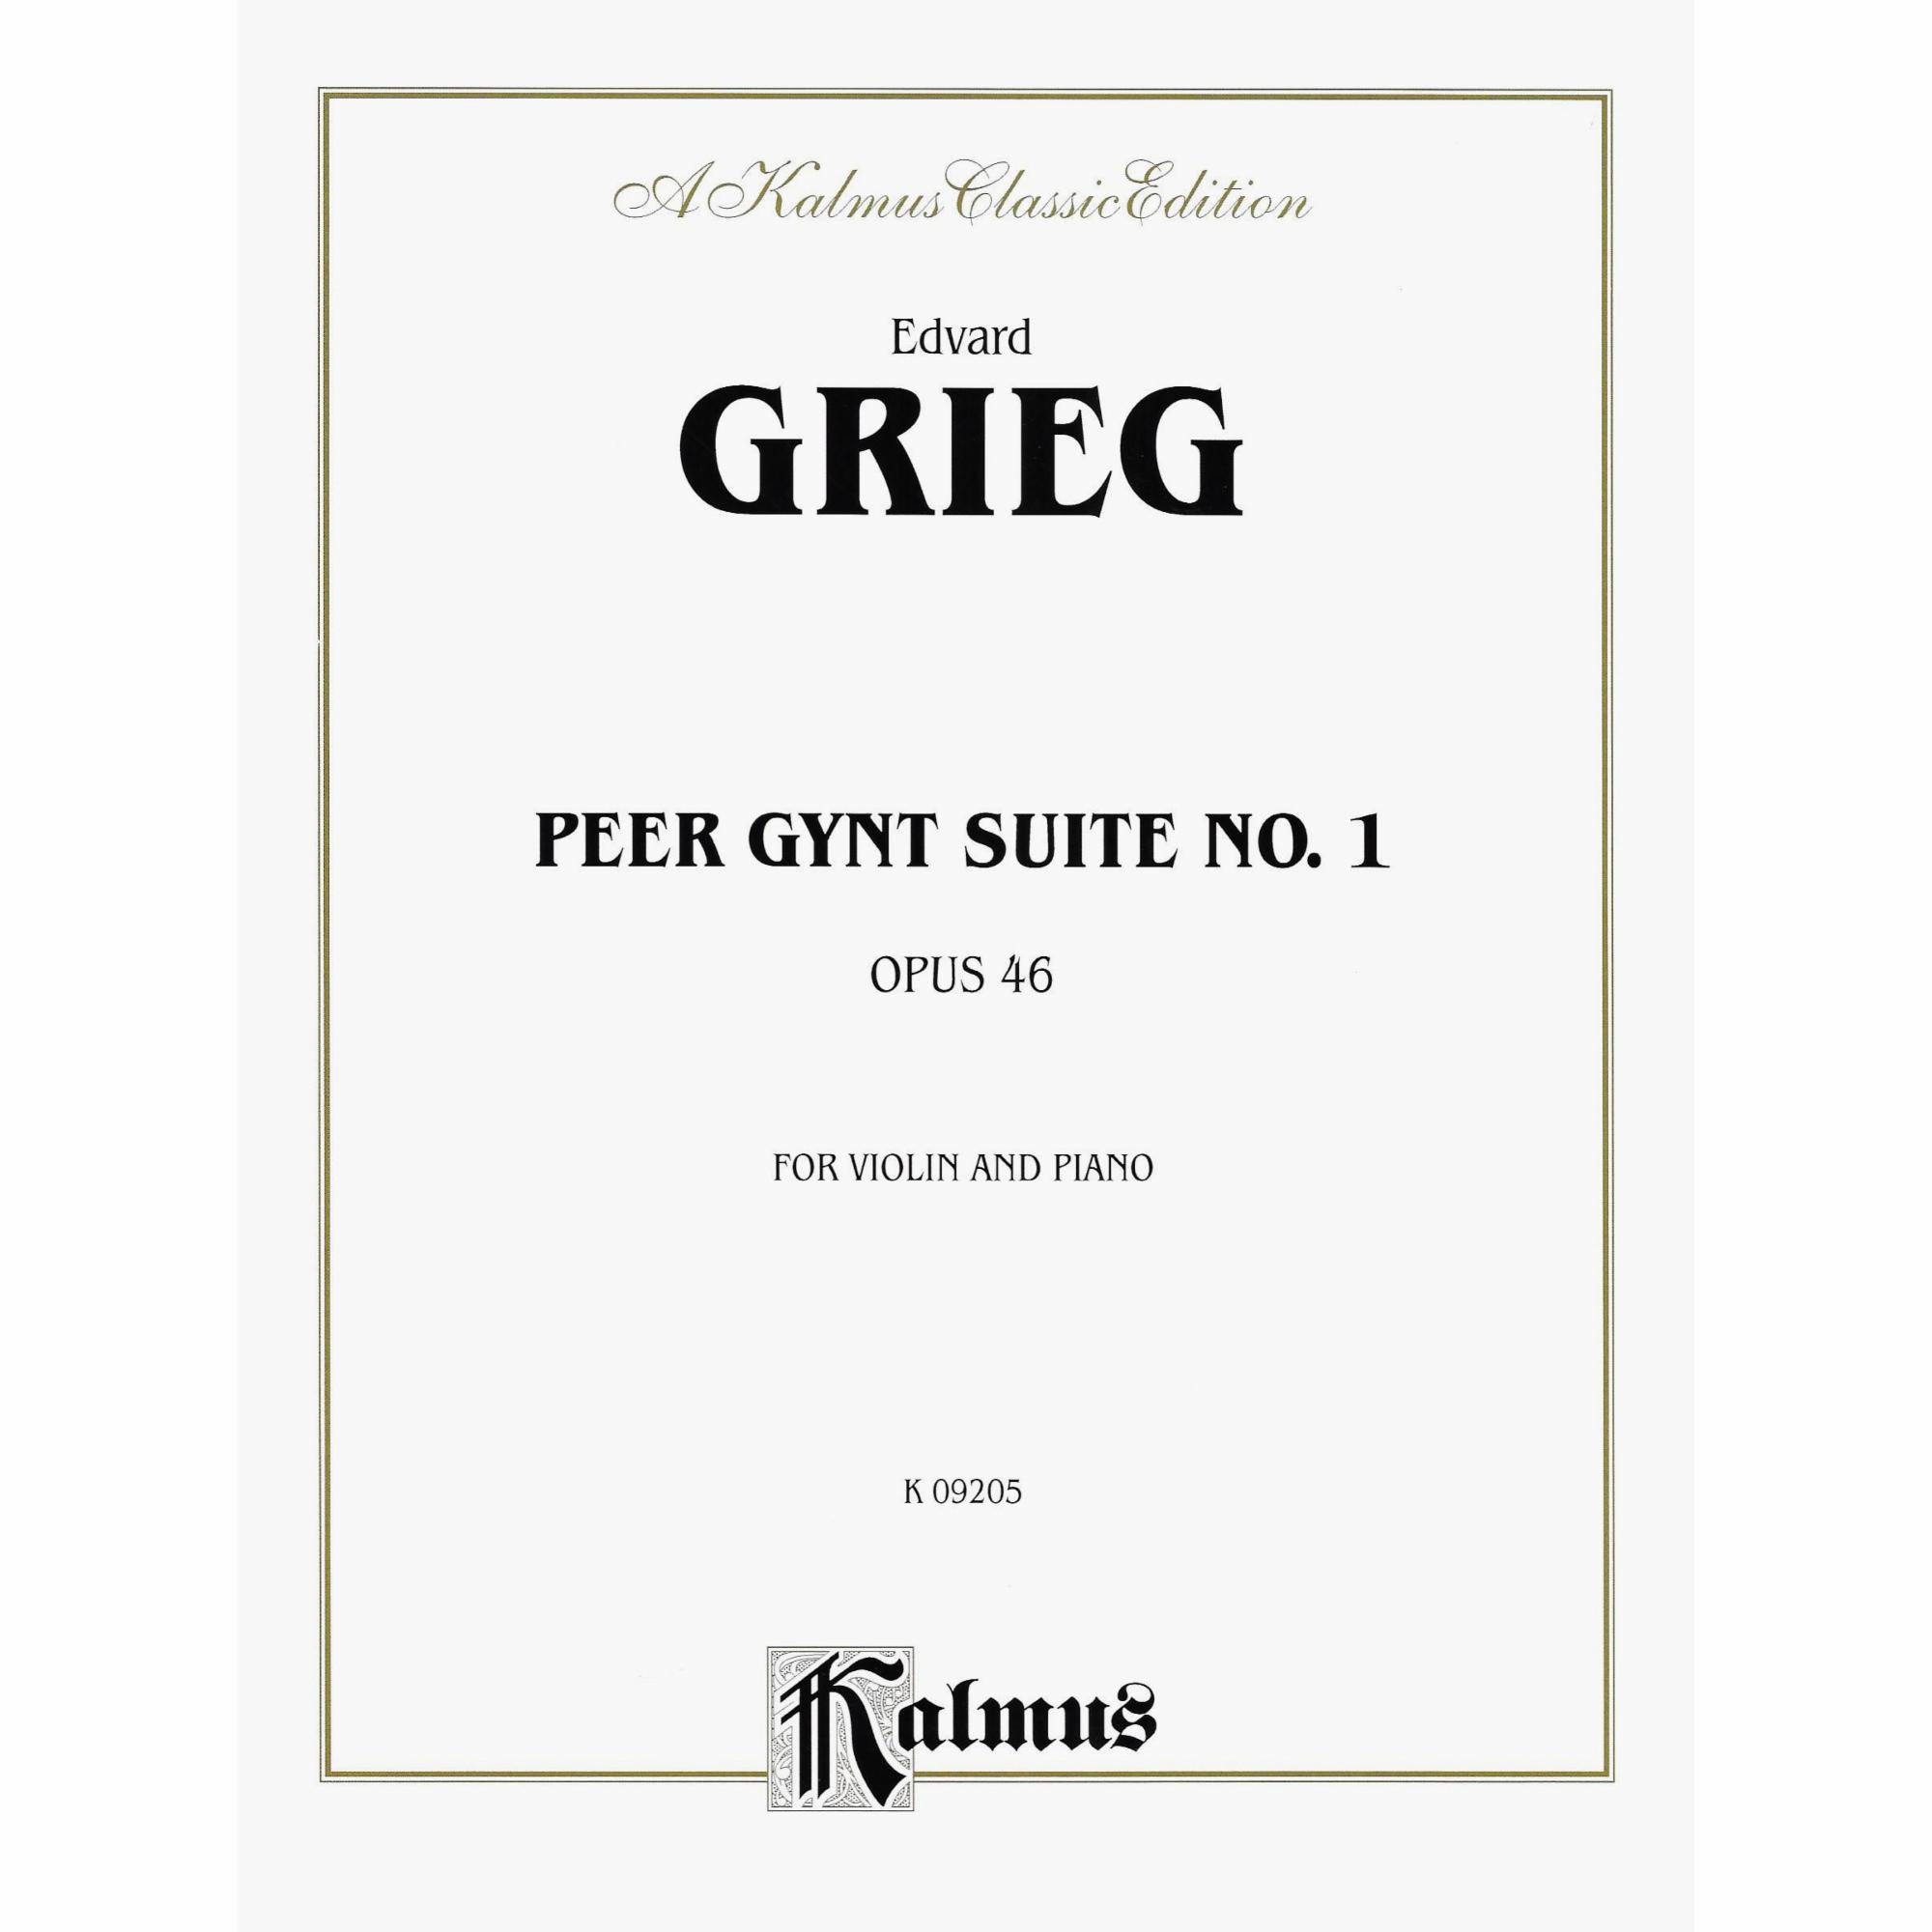 Grieg -- Peer Gynt Suite No. 1, Op. 46 for Violin and Piano